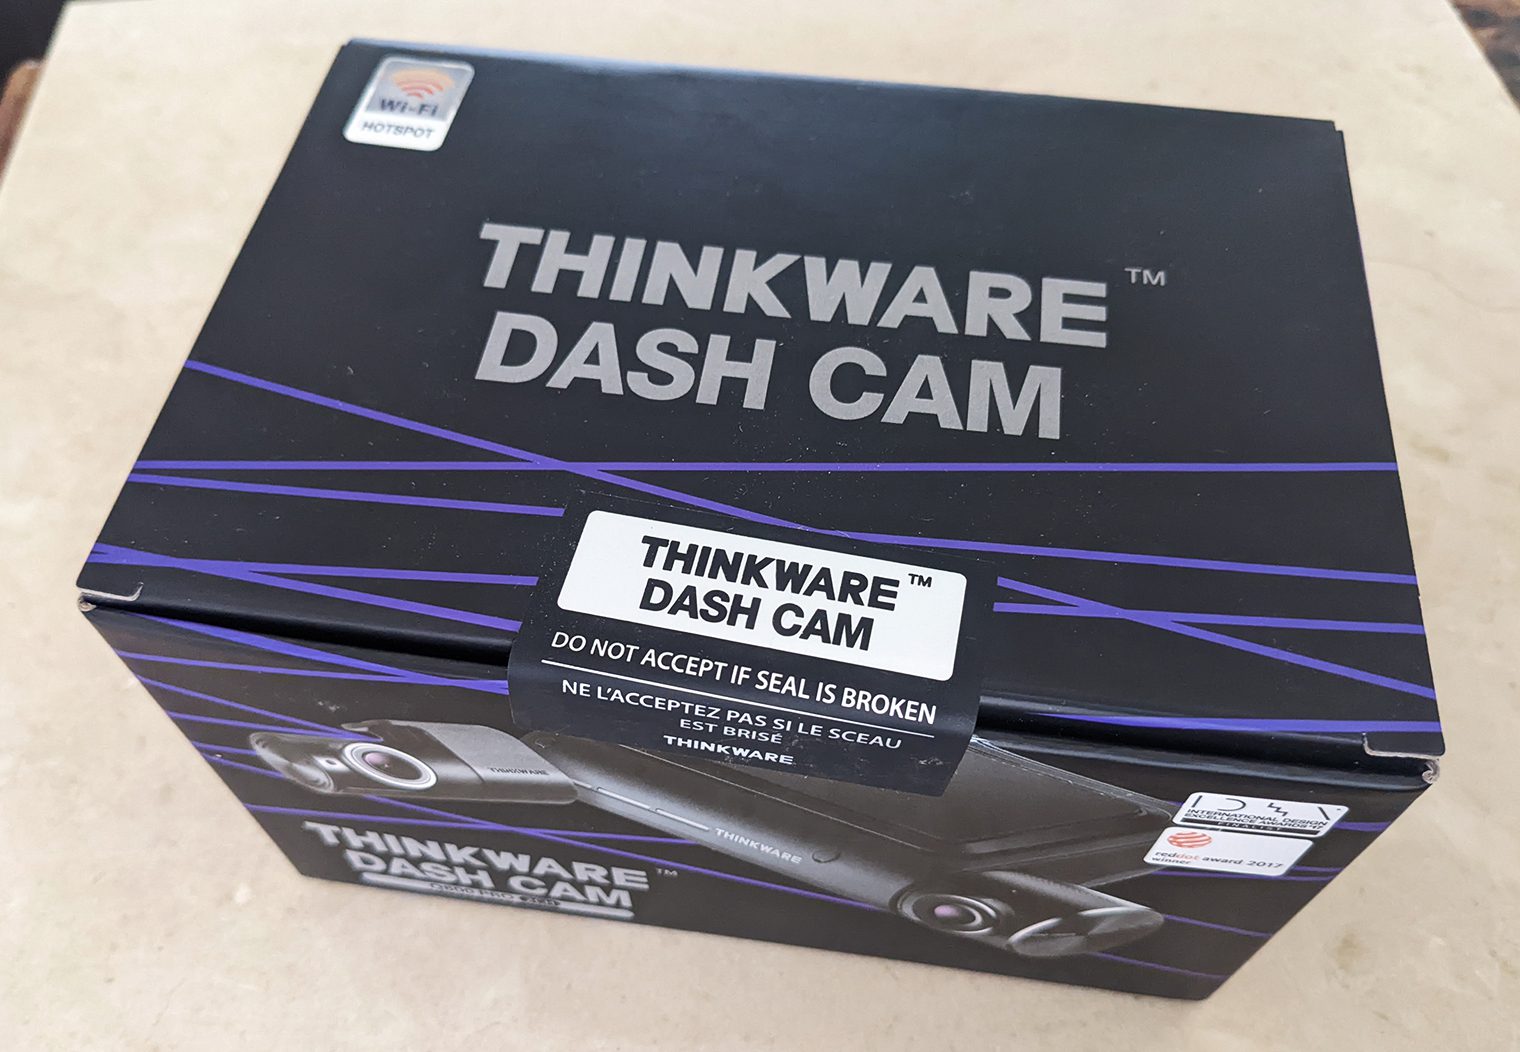 Thinkware Q800 PRO in box angle view before opening up for the first time